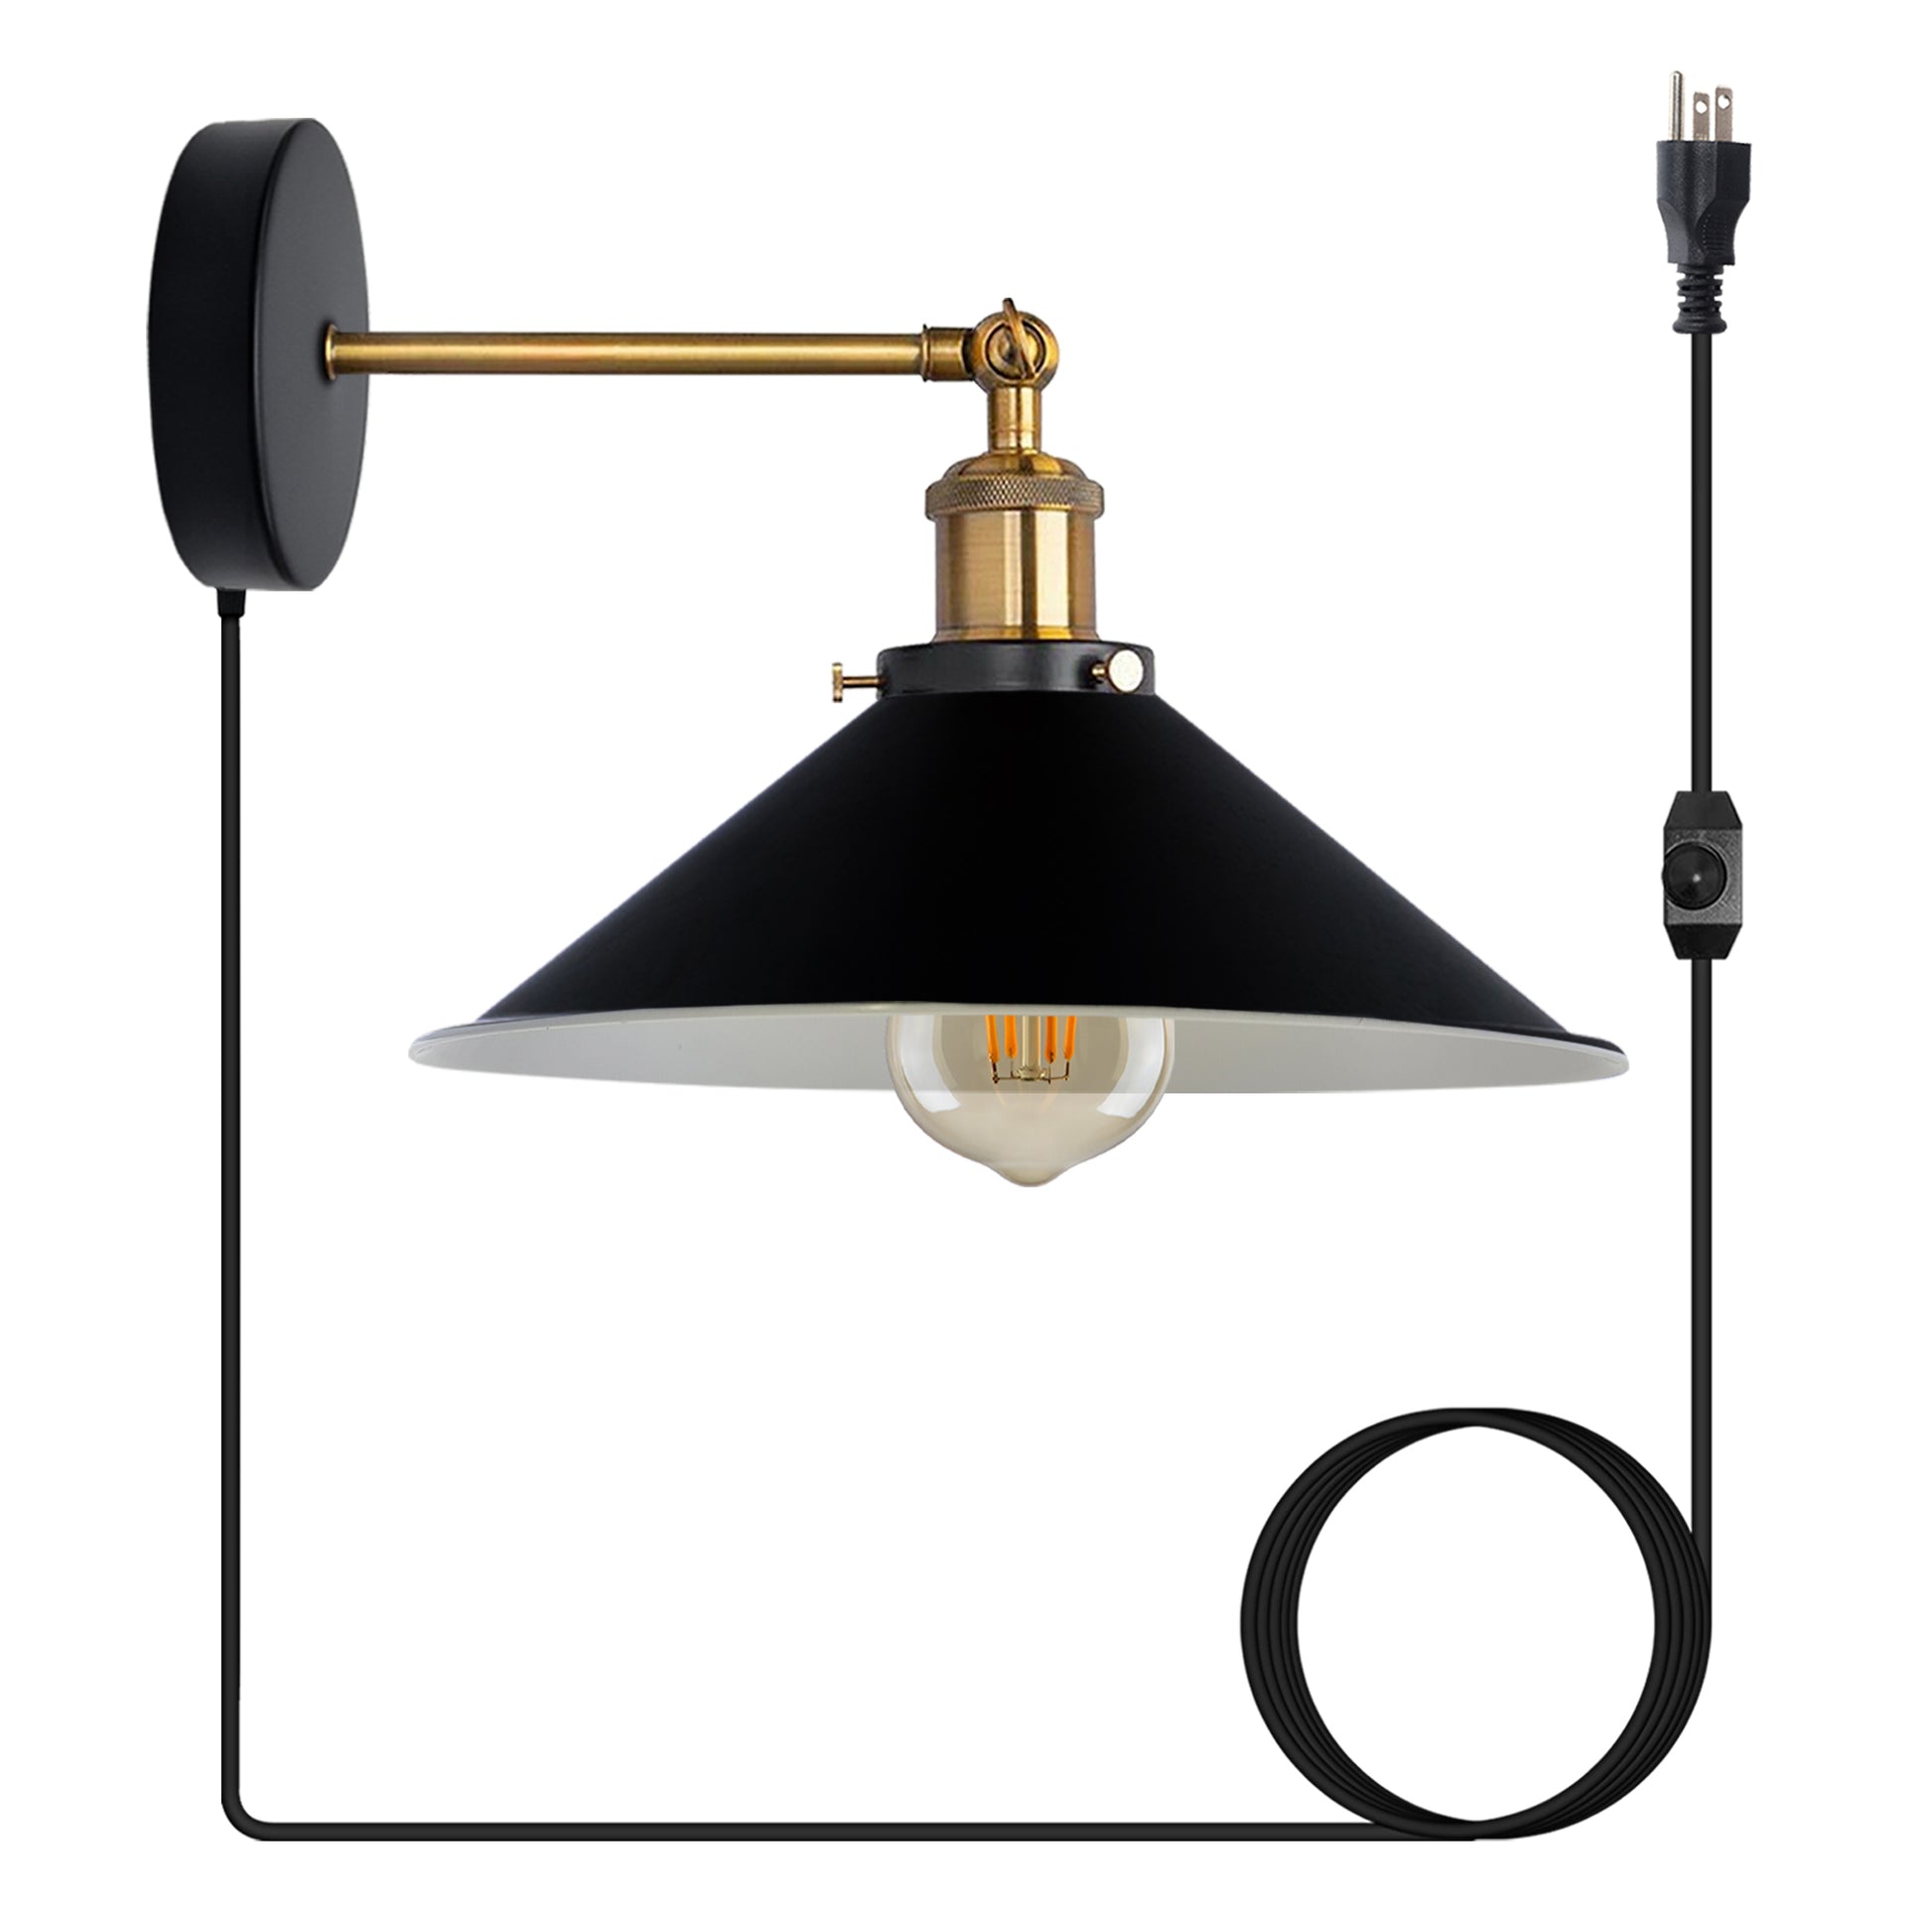 black Plug-in Wall Light Sconces with Dimmer Switch.JPG